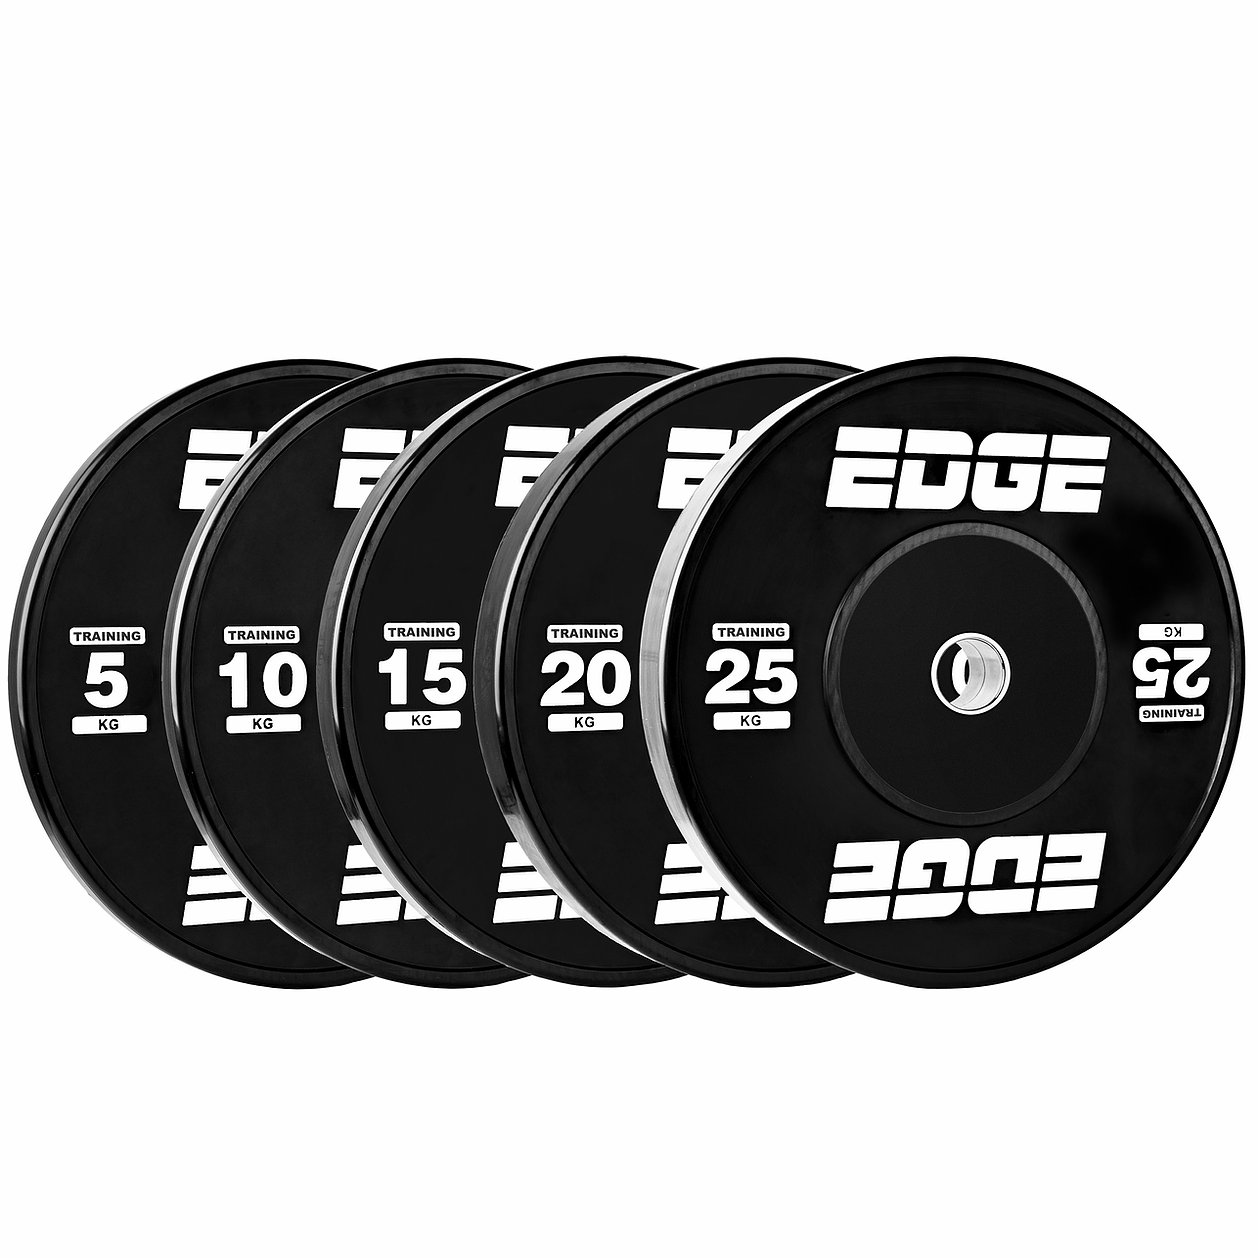 Plate Bumper Black Eco Weightlifting Plate Paird (25Kg x 2)